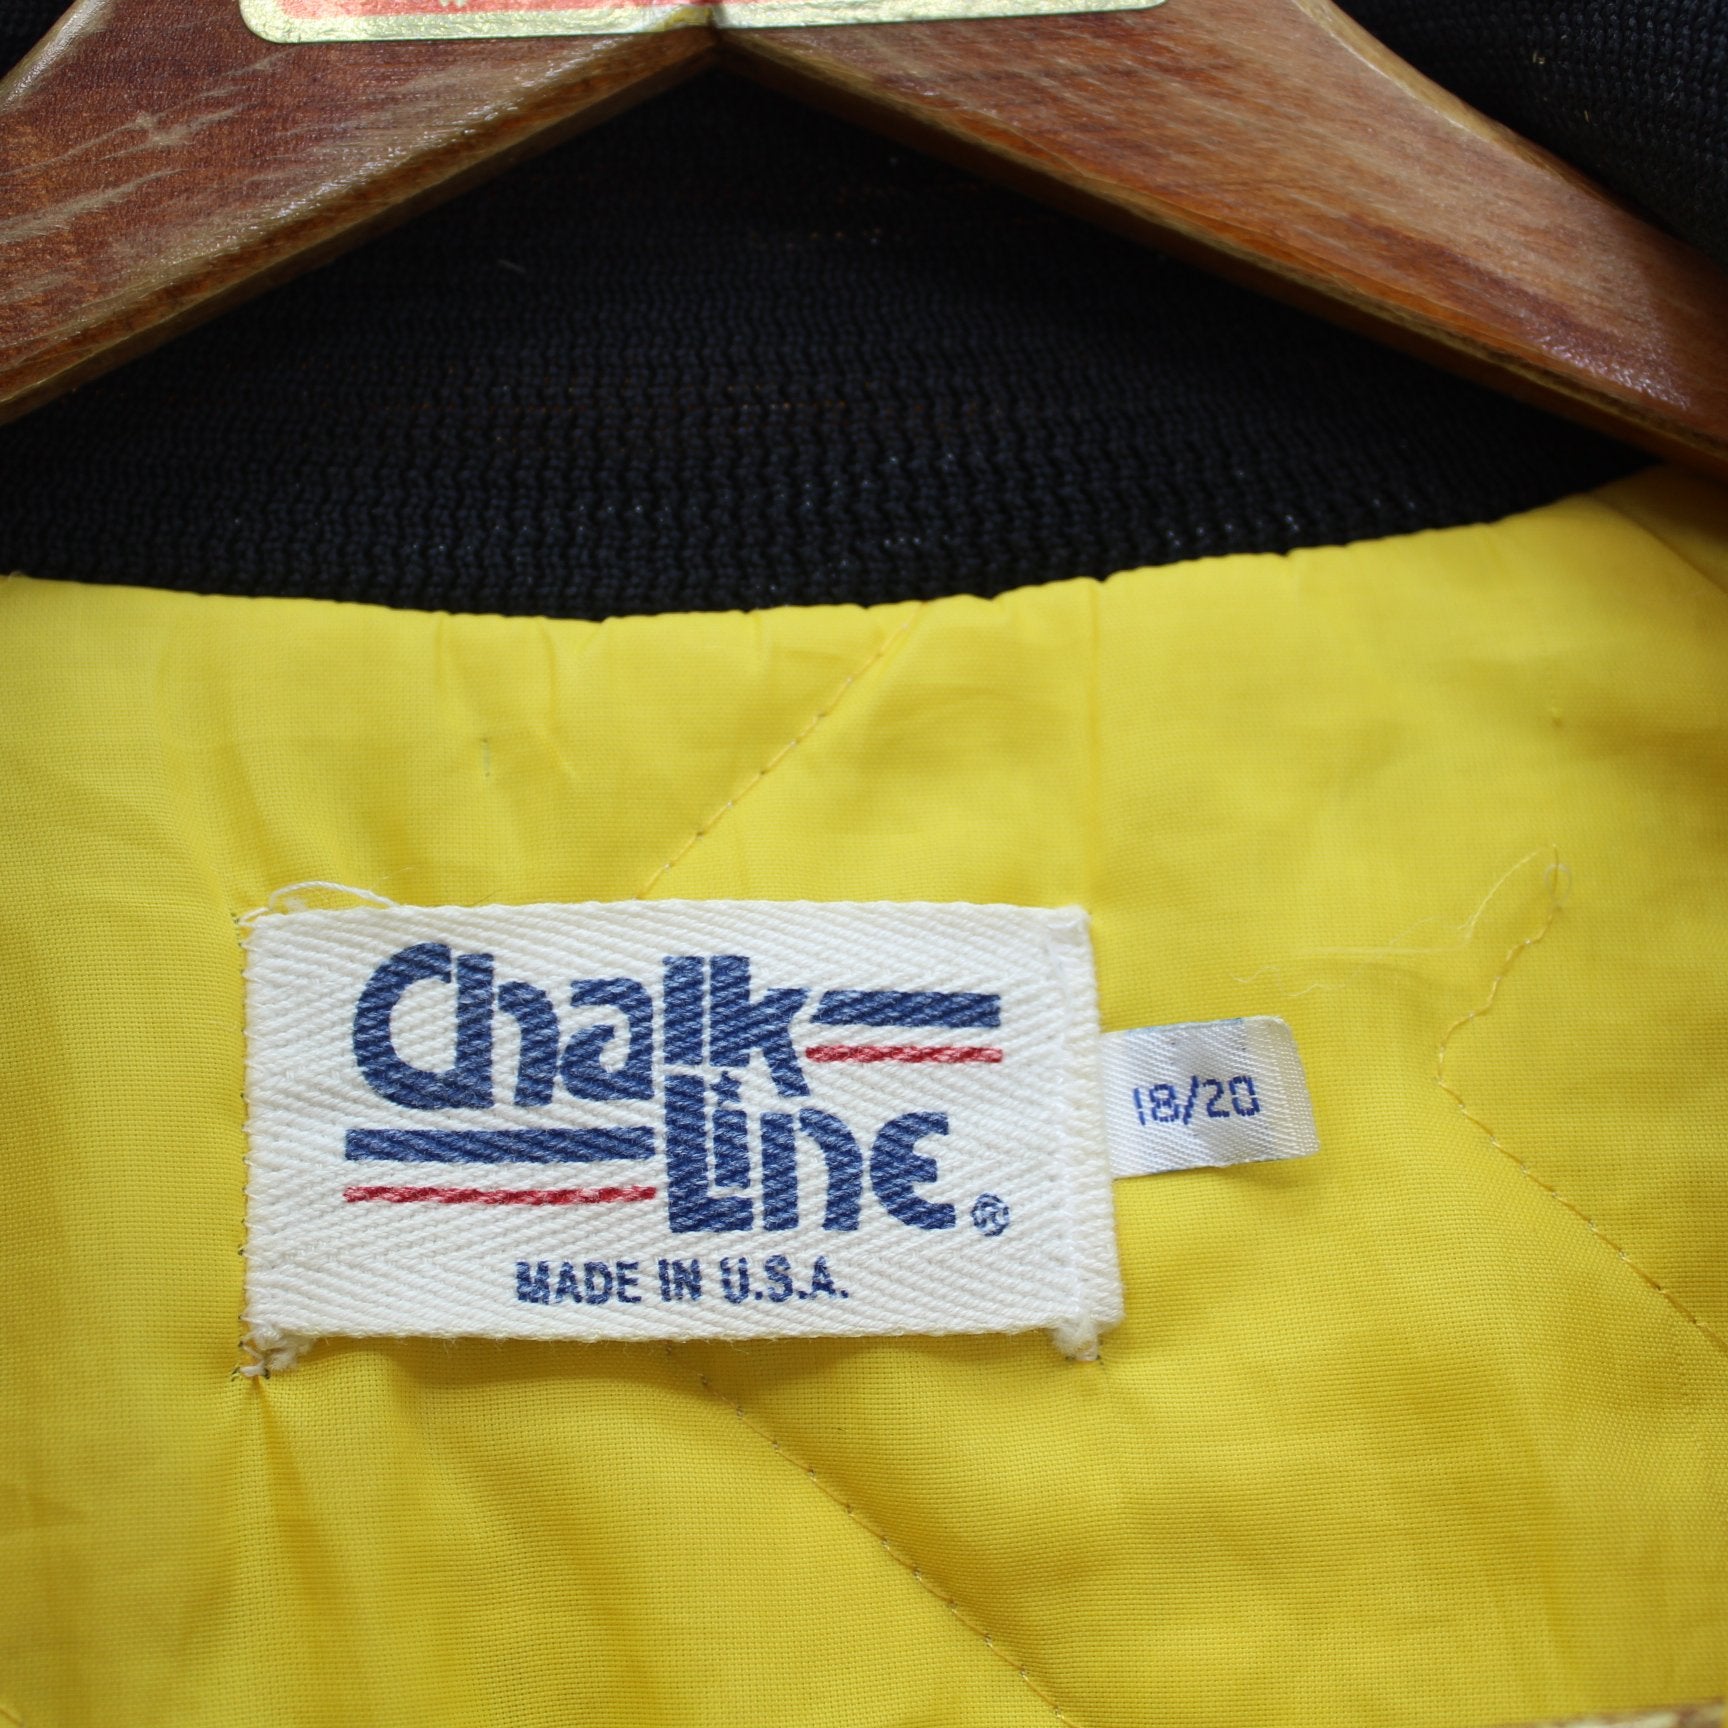 Steelers NFL Nylon Warm Up Jacket Size 18/20 Small Maker Chalk Line USA Collectible maker tag chalk line usa